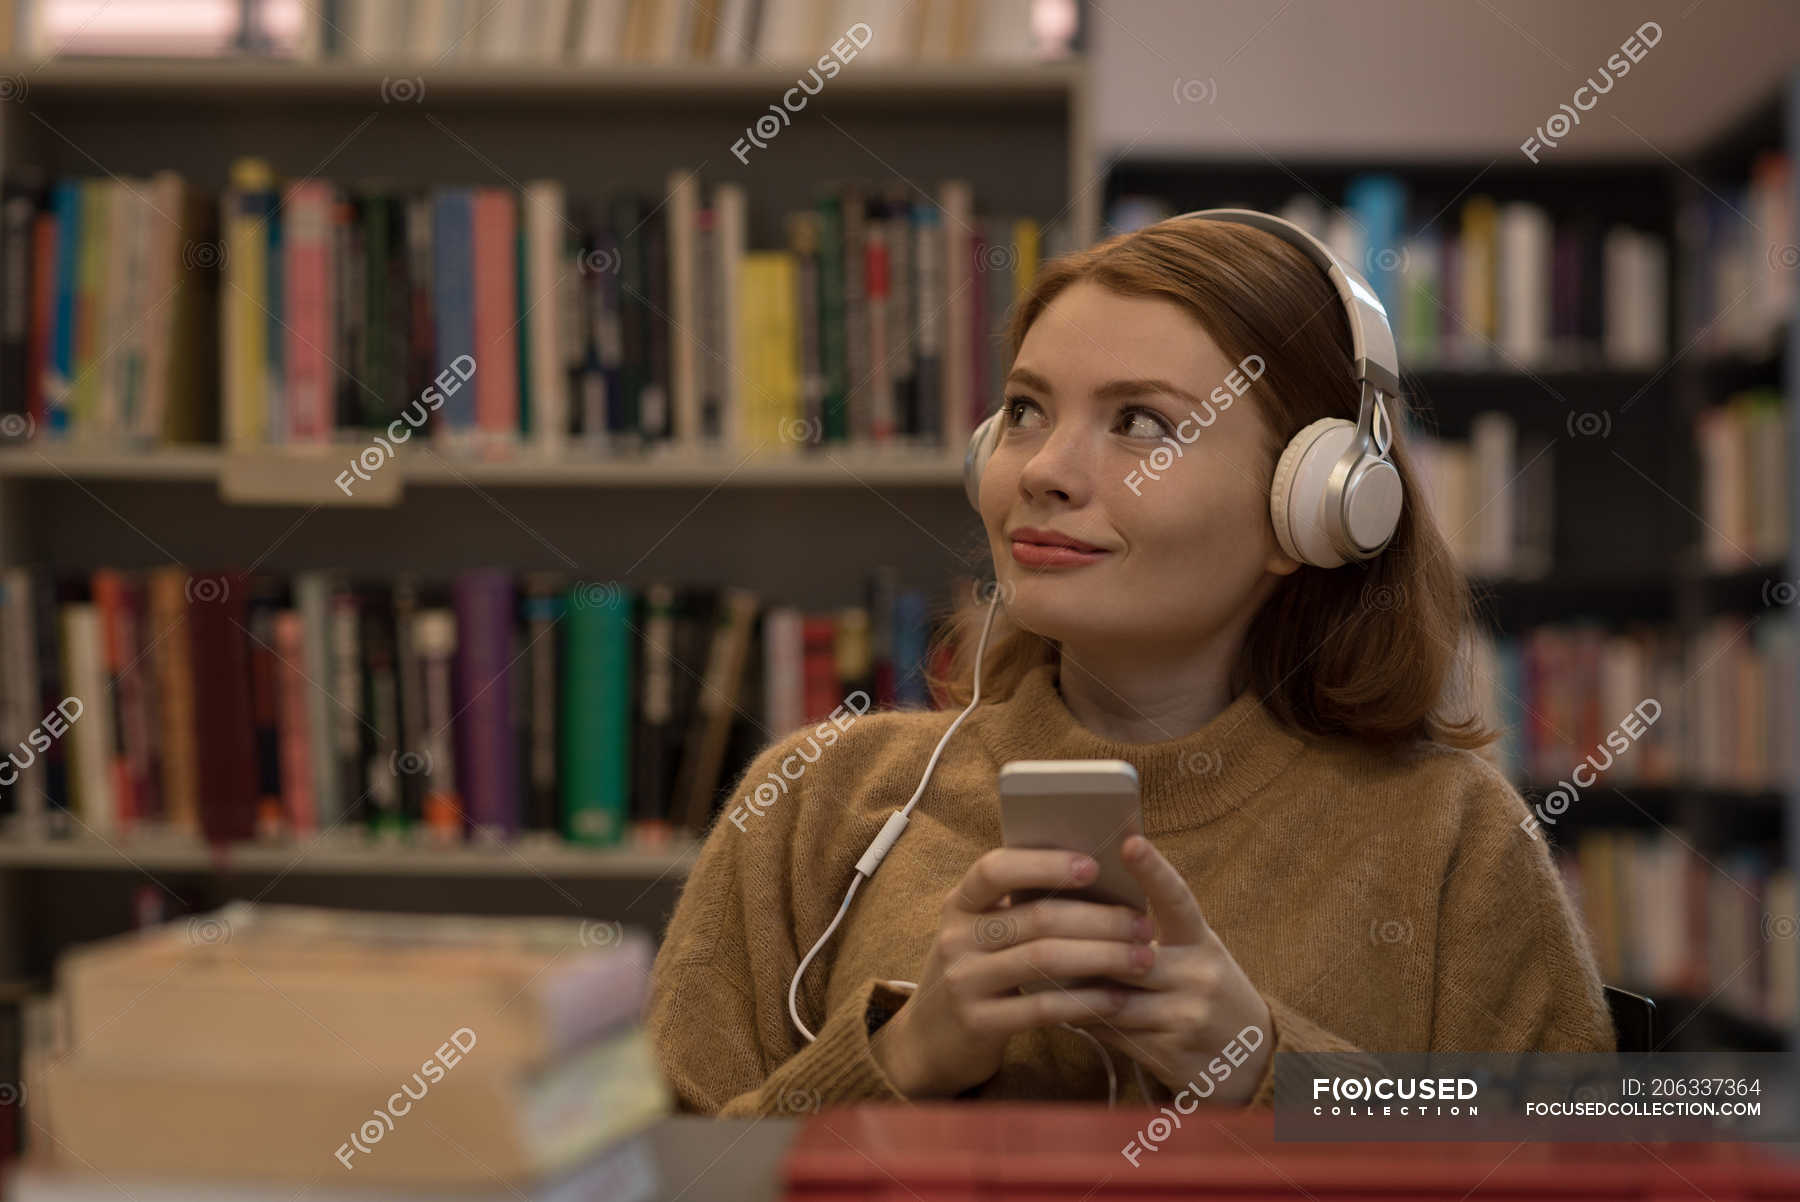 perfecttunes listening to library